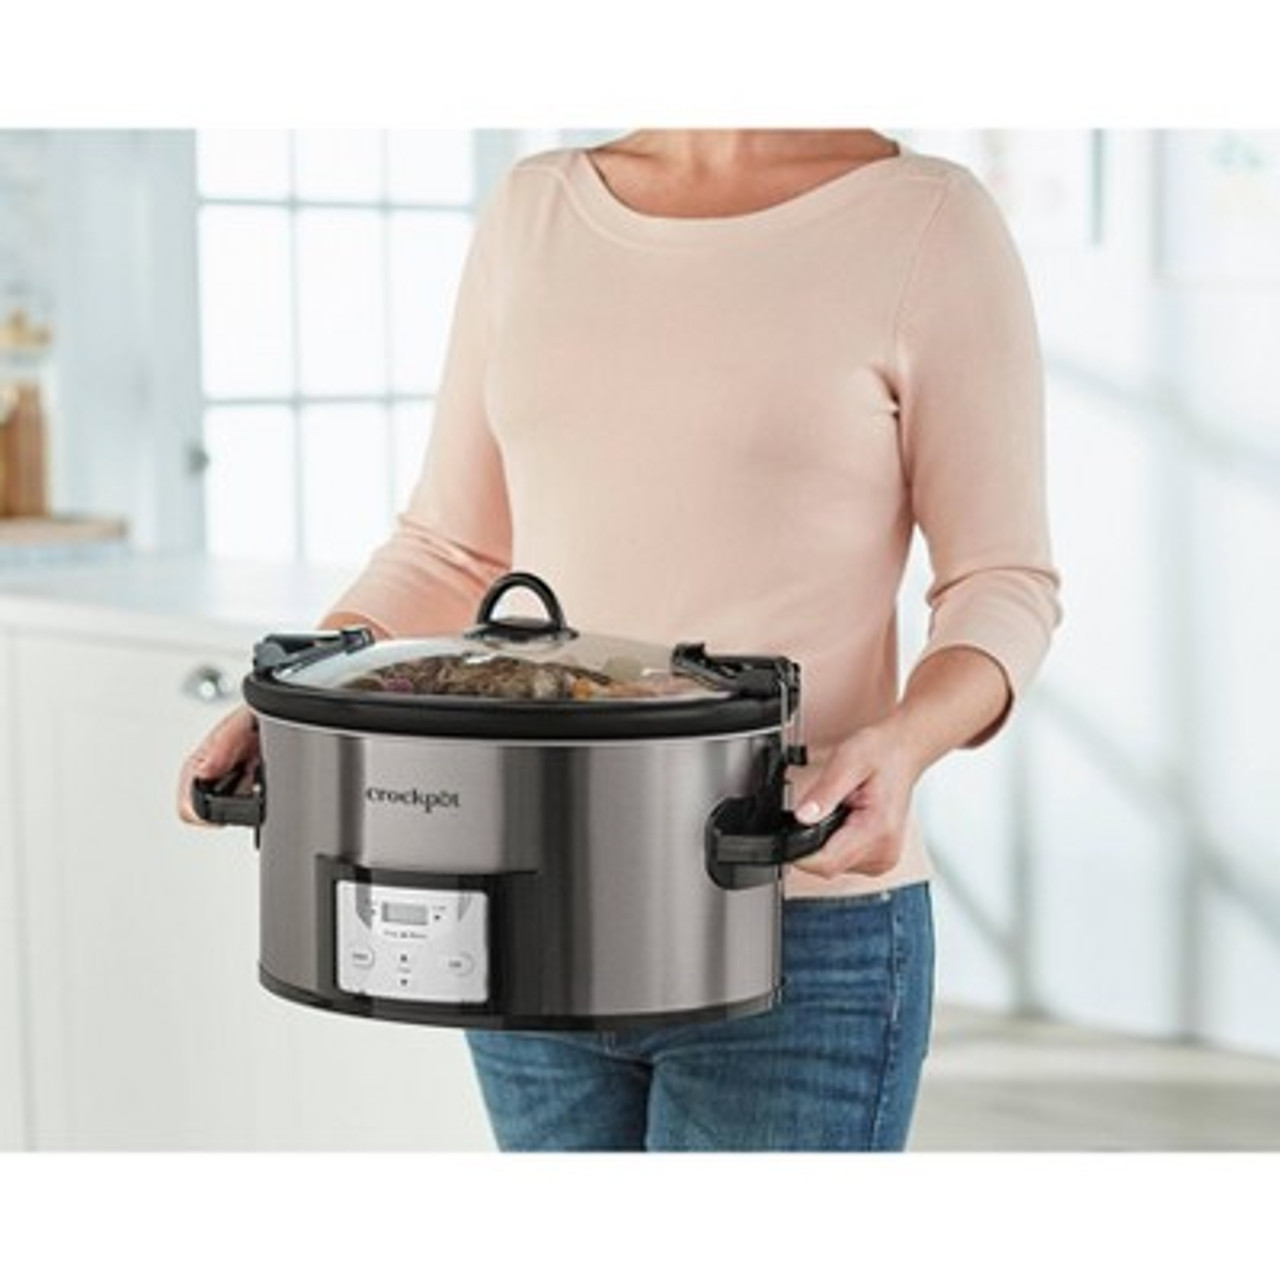 Crock Pot 7qt Cook and Carry Programmable Easy-Clean Slow Cooker - Premium Black Stainless Steel